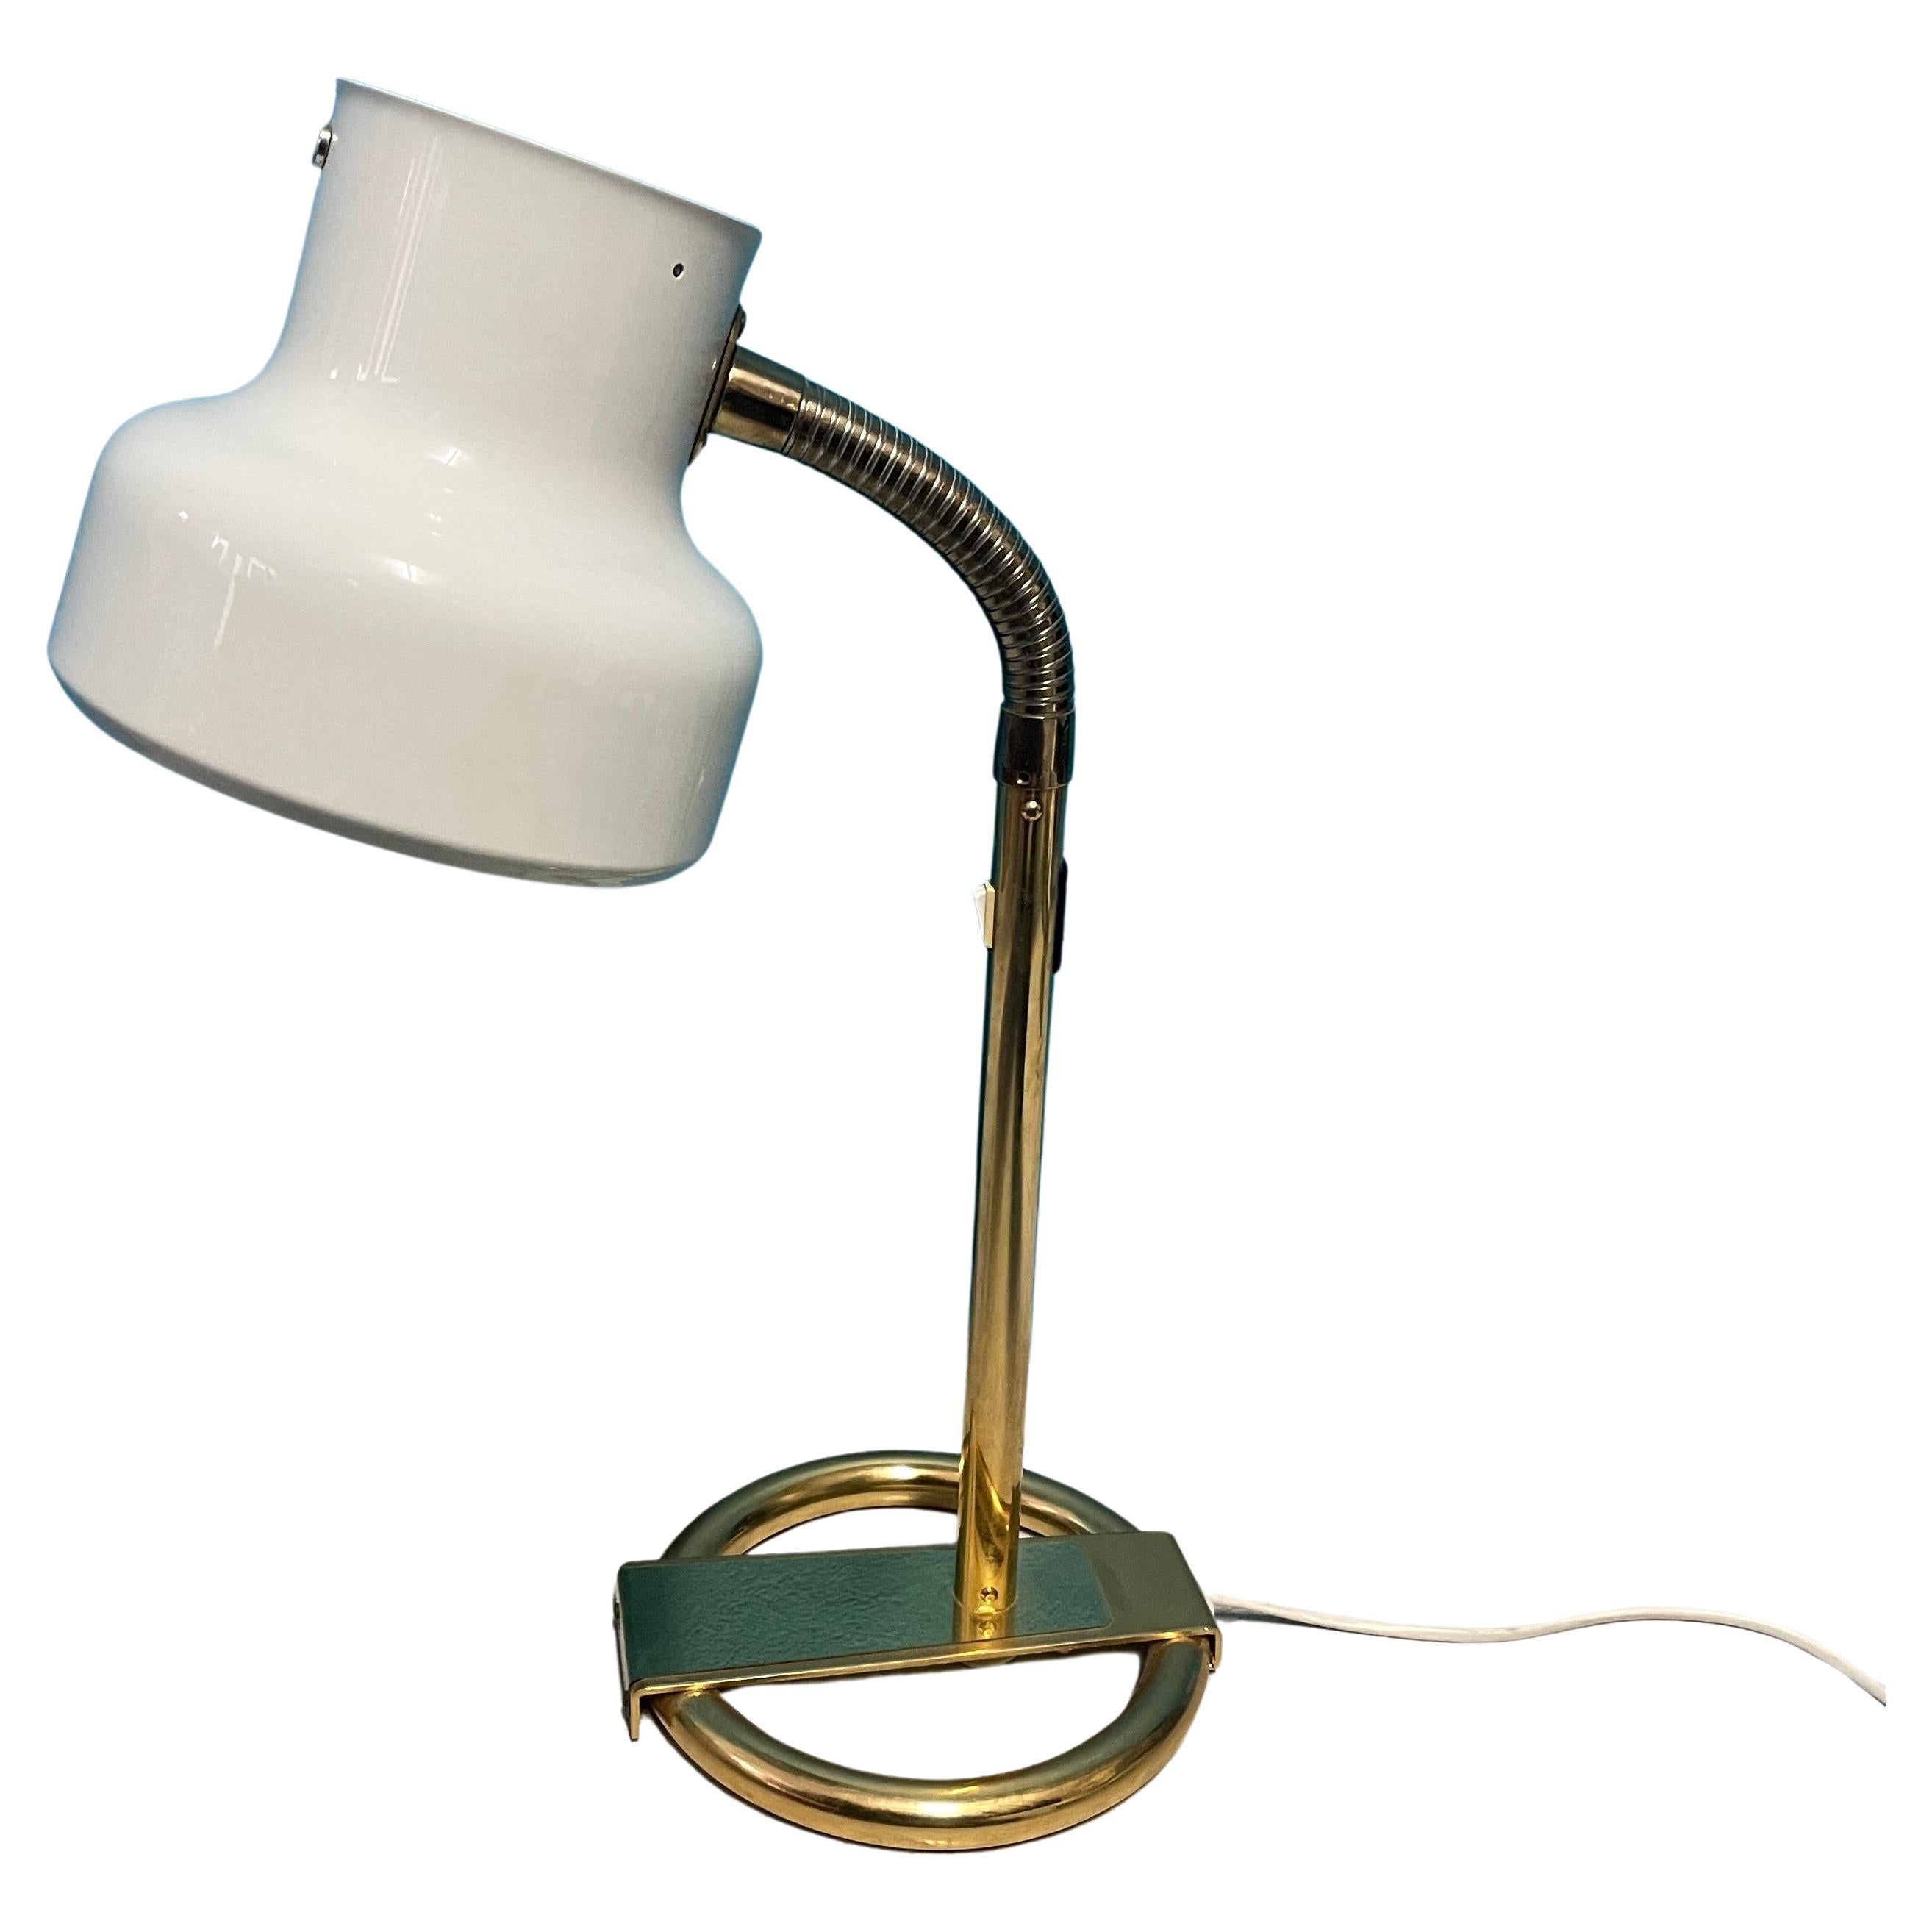 Iconic Swedish Bumling table lamp. Bumling lamp series Designed in 1968 by Anders Pehrson for Ateljé Lyktan, Ahus, Sweden.

This lamp has a beautiful and timeless color combination, brass frame with white colored shade.  

- Adjustable Shade
-